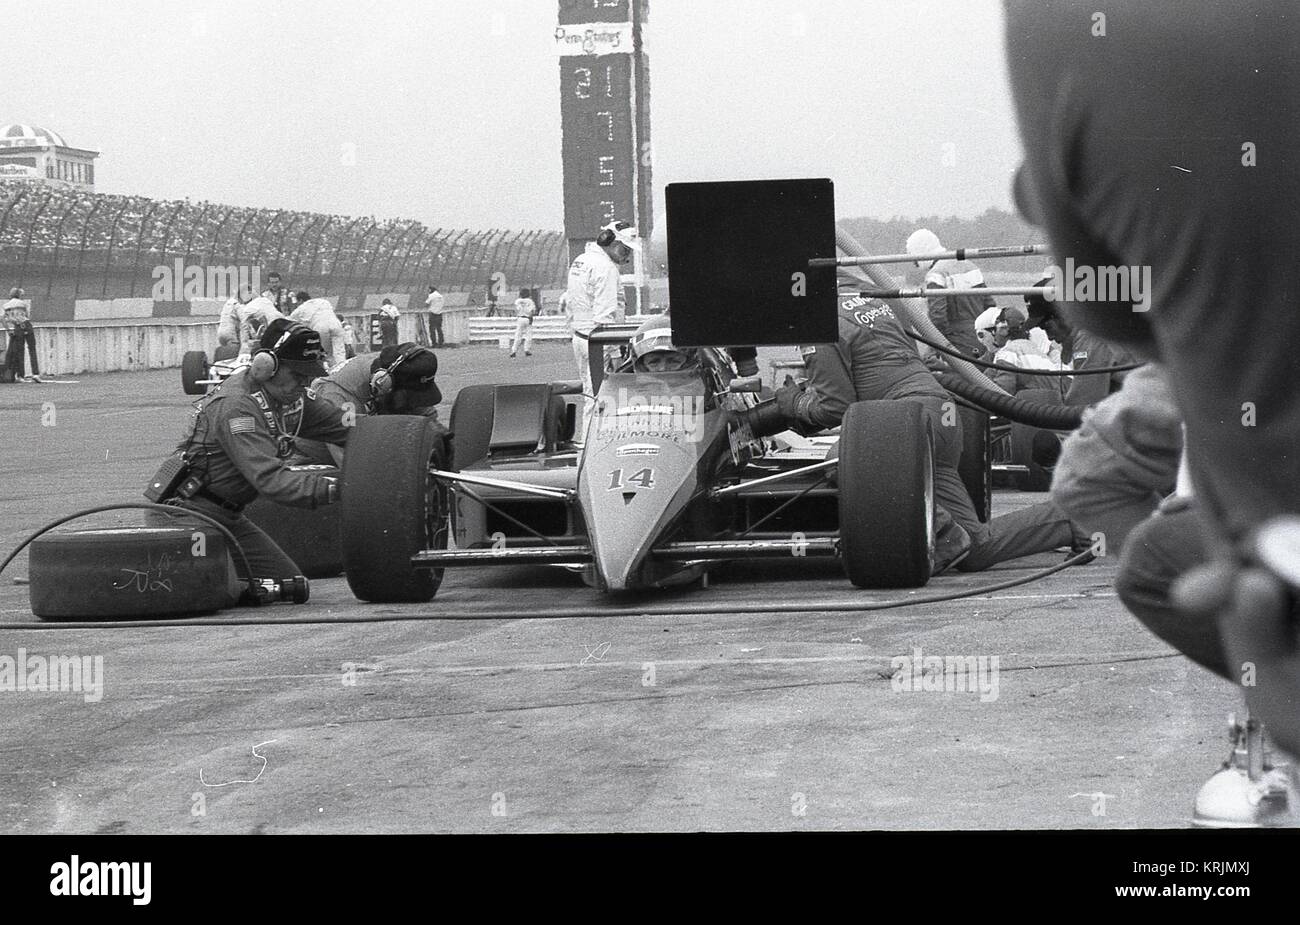 Pit action during Indy race at Pocono Raceway in 1988 Stock Photo - Alamy